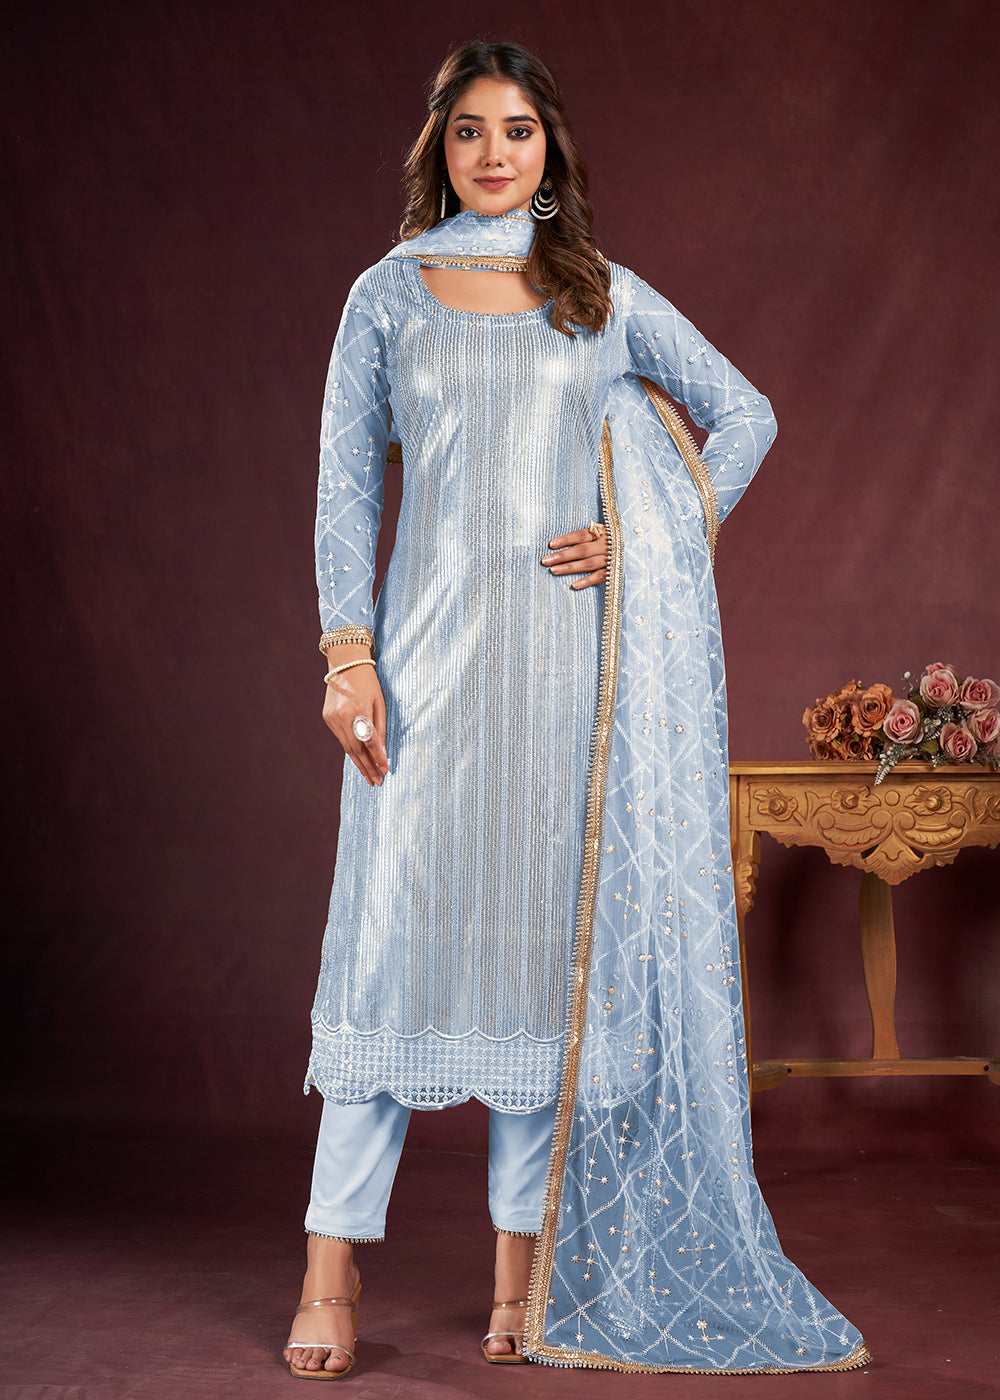 Buy Now Ice Blue Butterfly Net Embroidered Festive Salwar Suit Online in USA, UK, Canada, Germany, Australia & Worldwide at Empress Clothing.